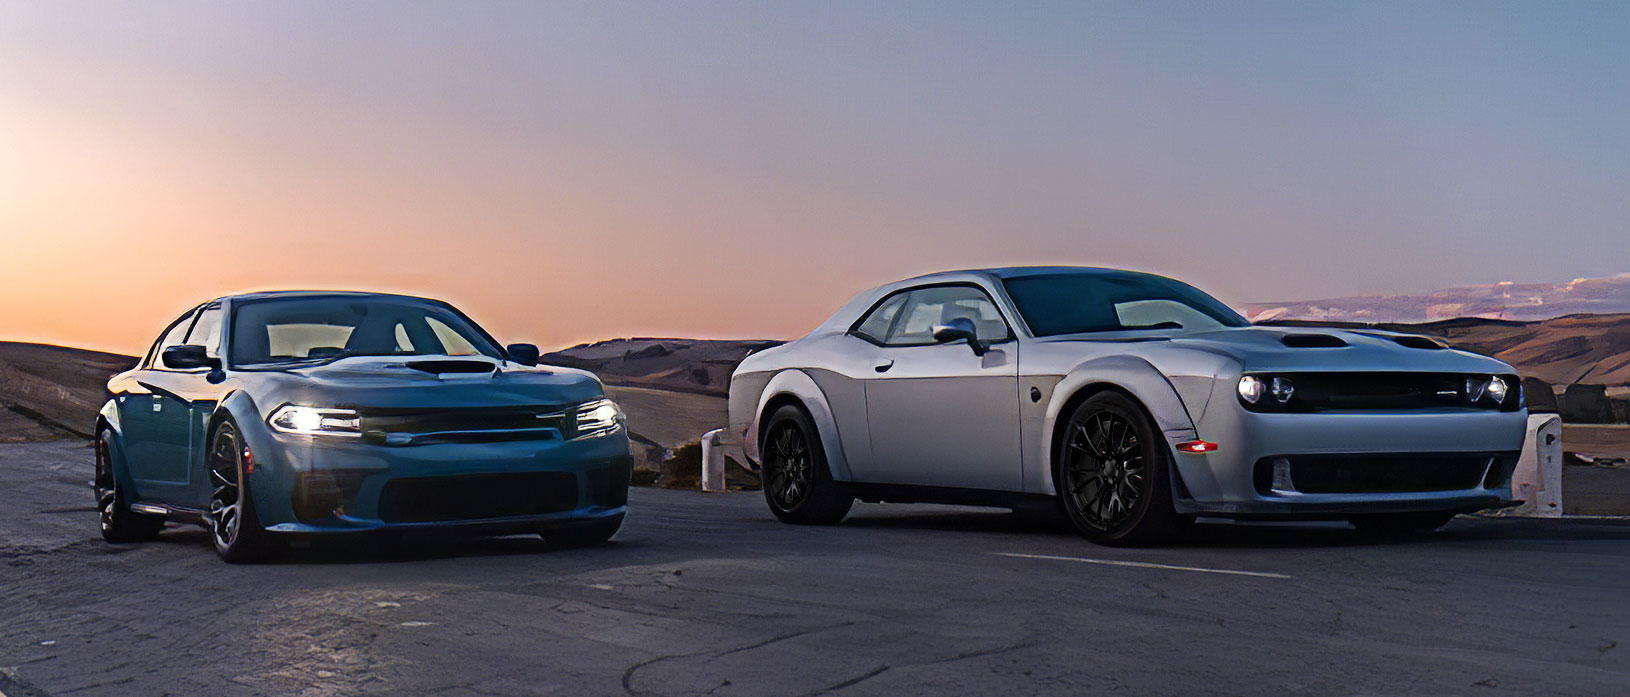 Challenger and Charger driving with sunset in the background